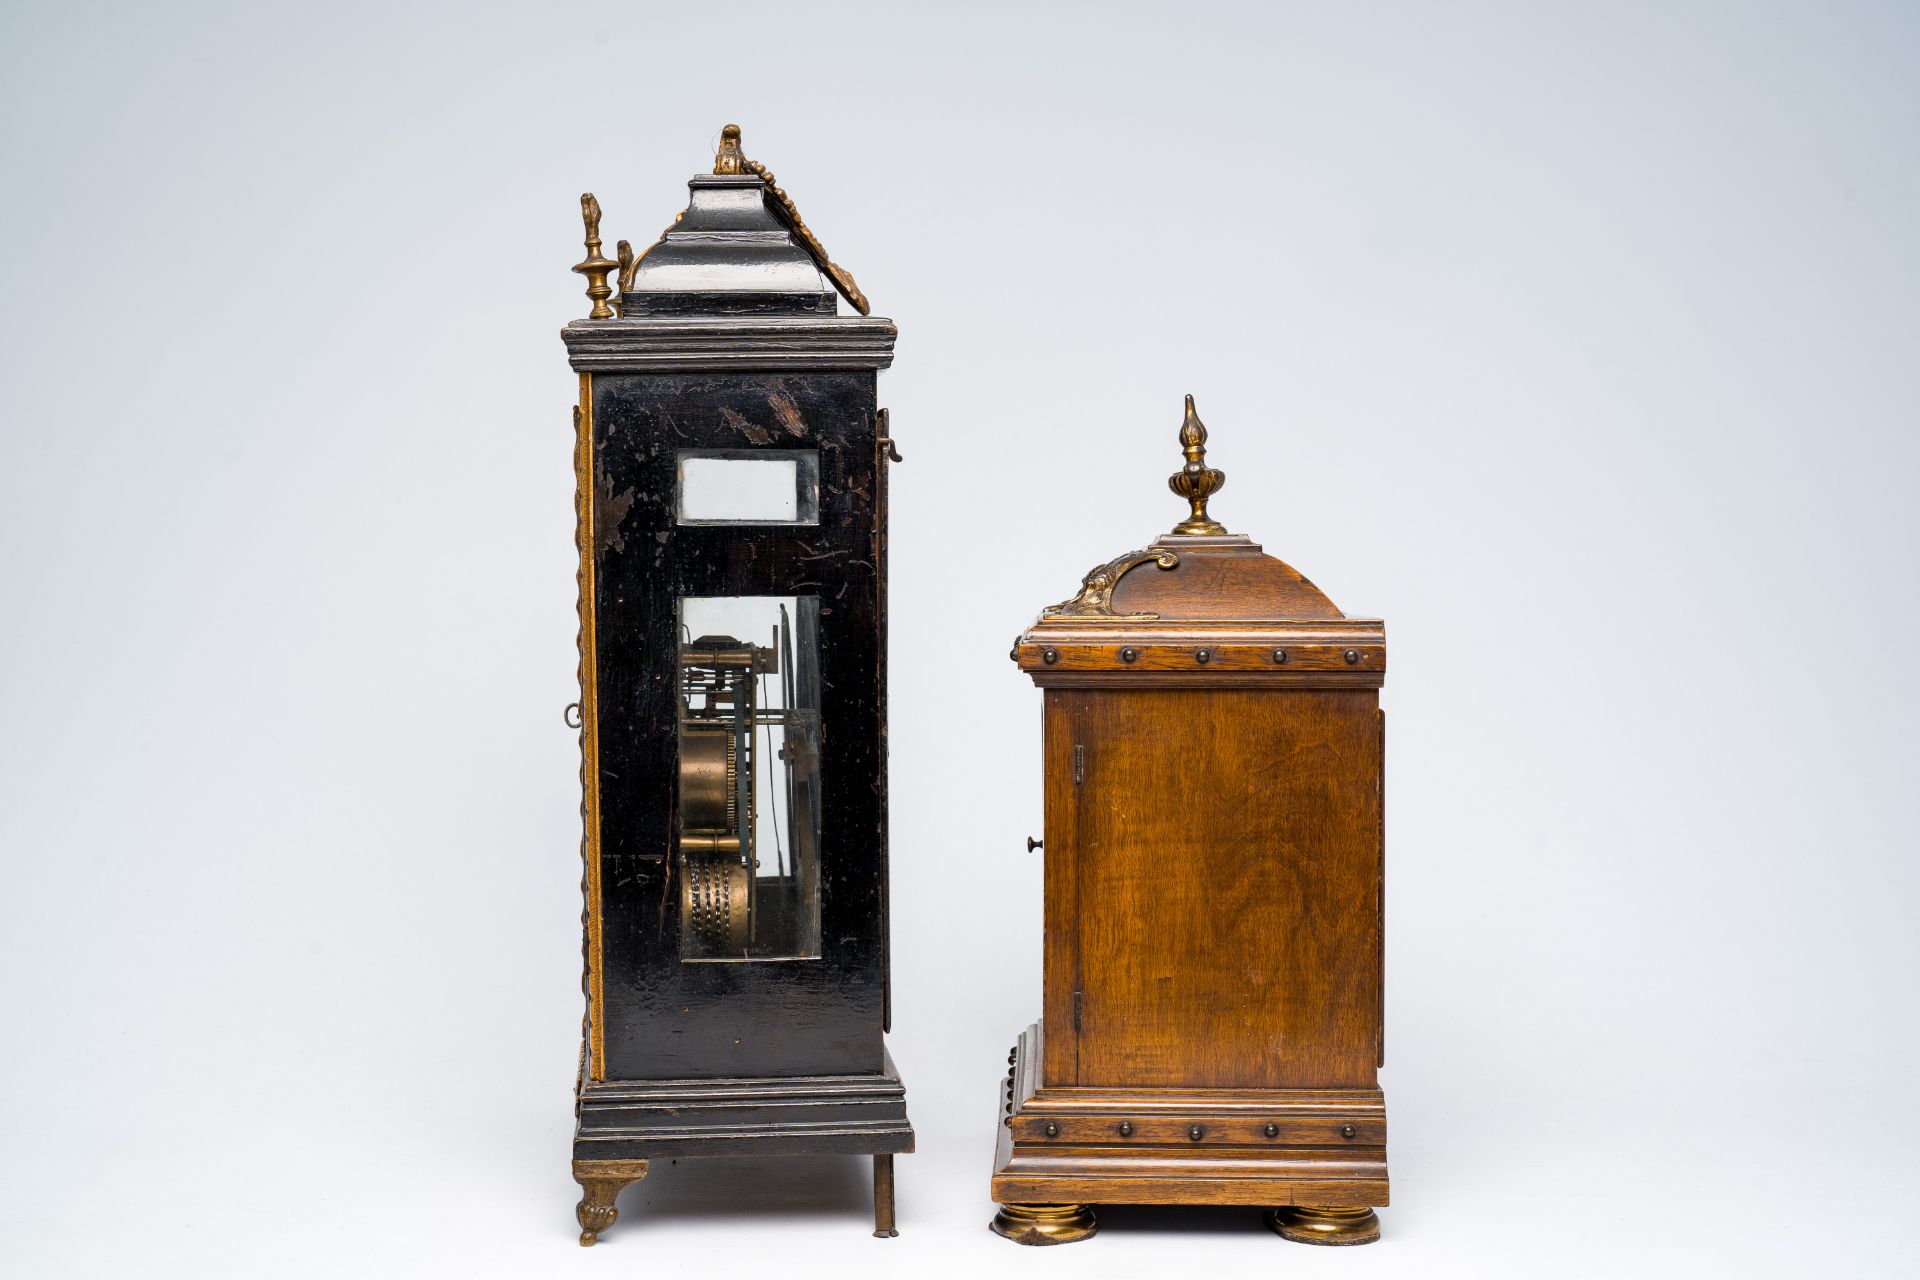 Two German bronze mounted table clocks in (ebonized) wood, 19th/20th C. - Image 2 of 7